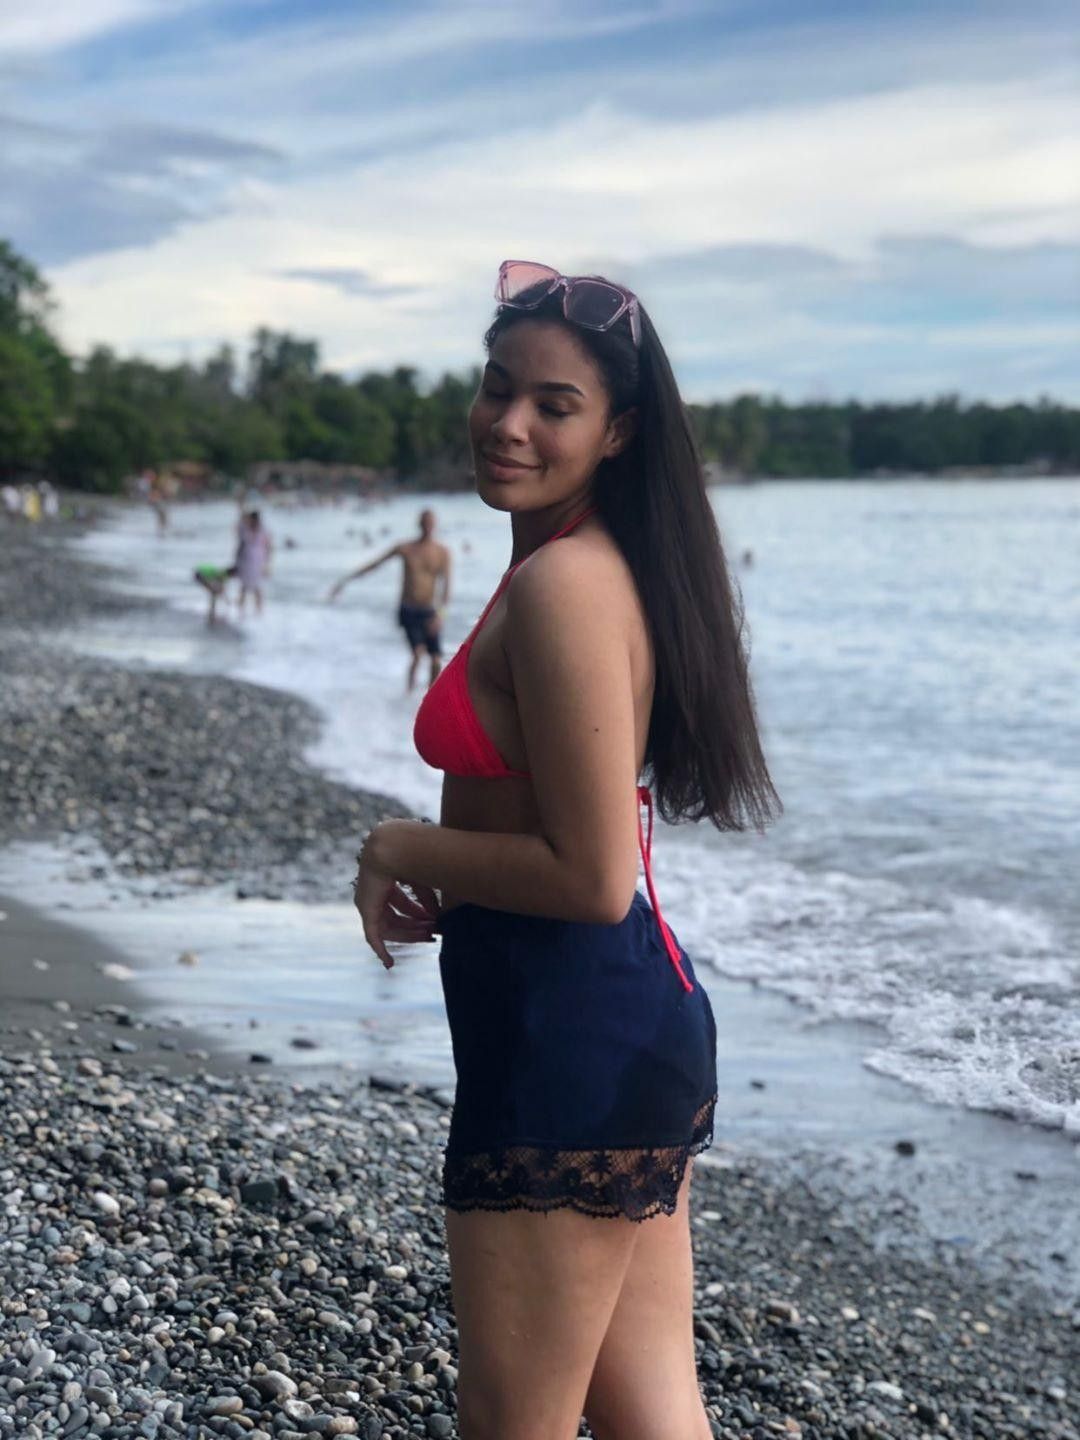 arenla jamir recommends dominican girls in bikinis pic